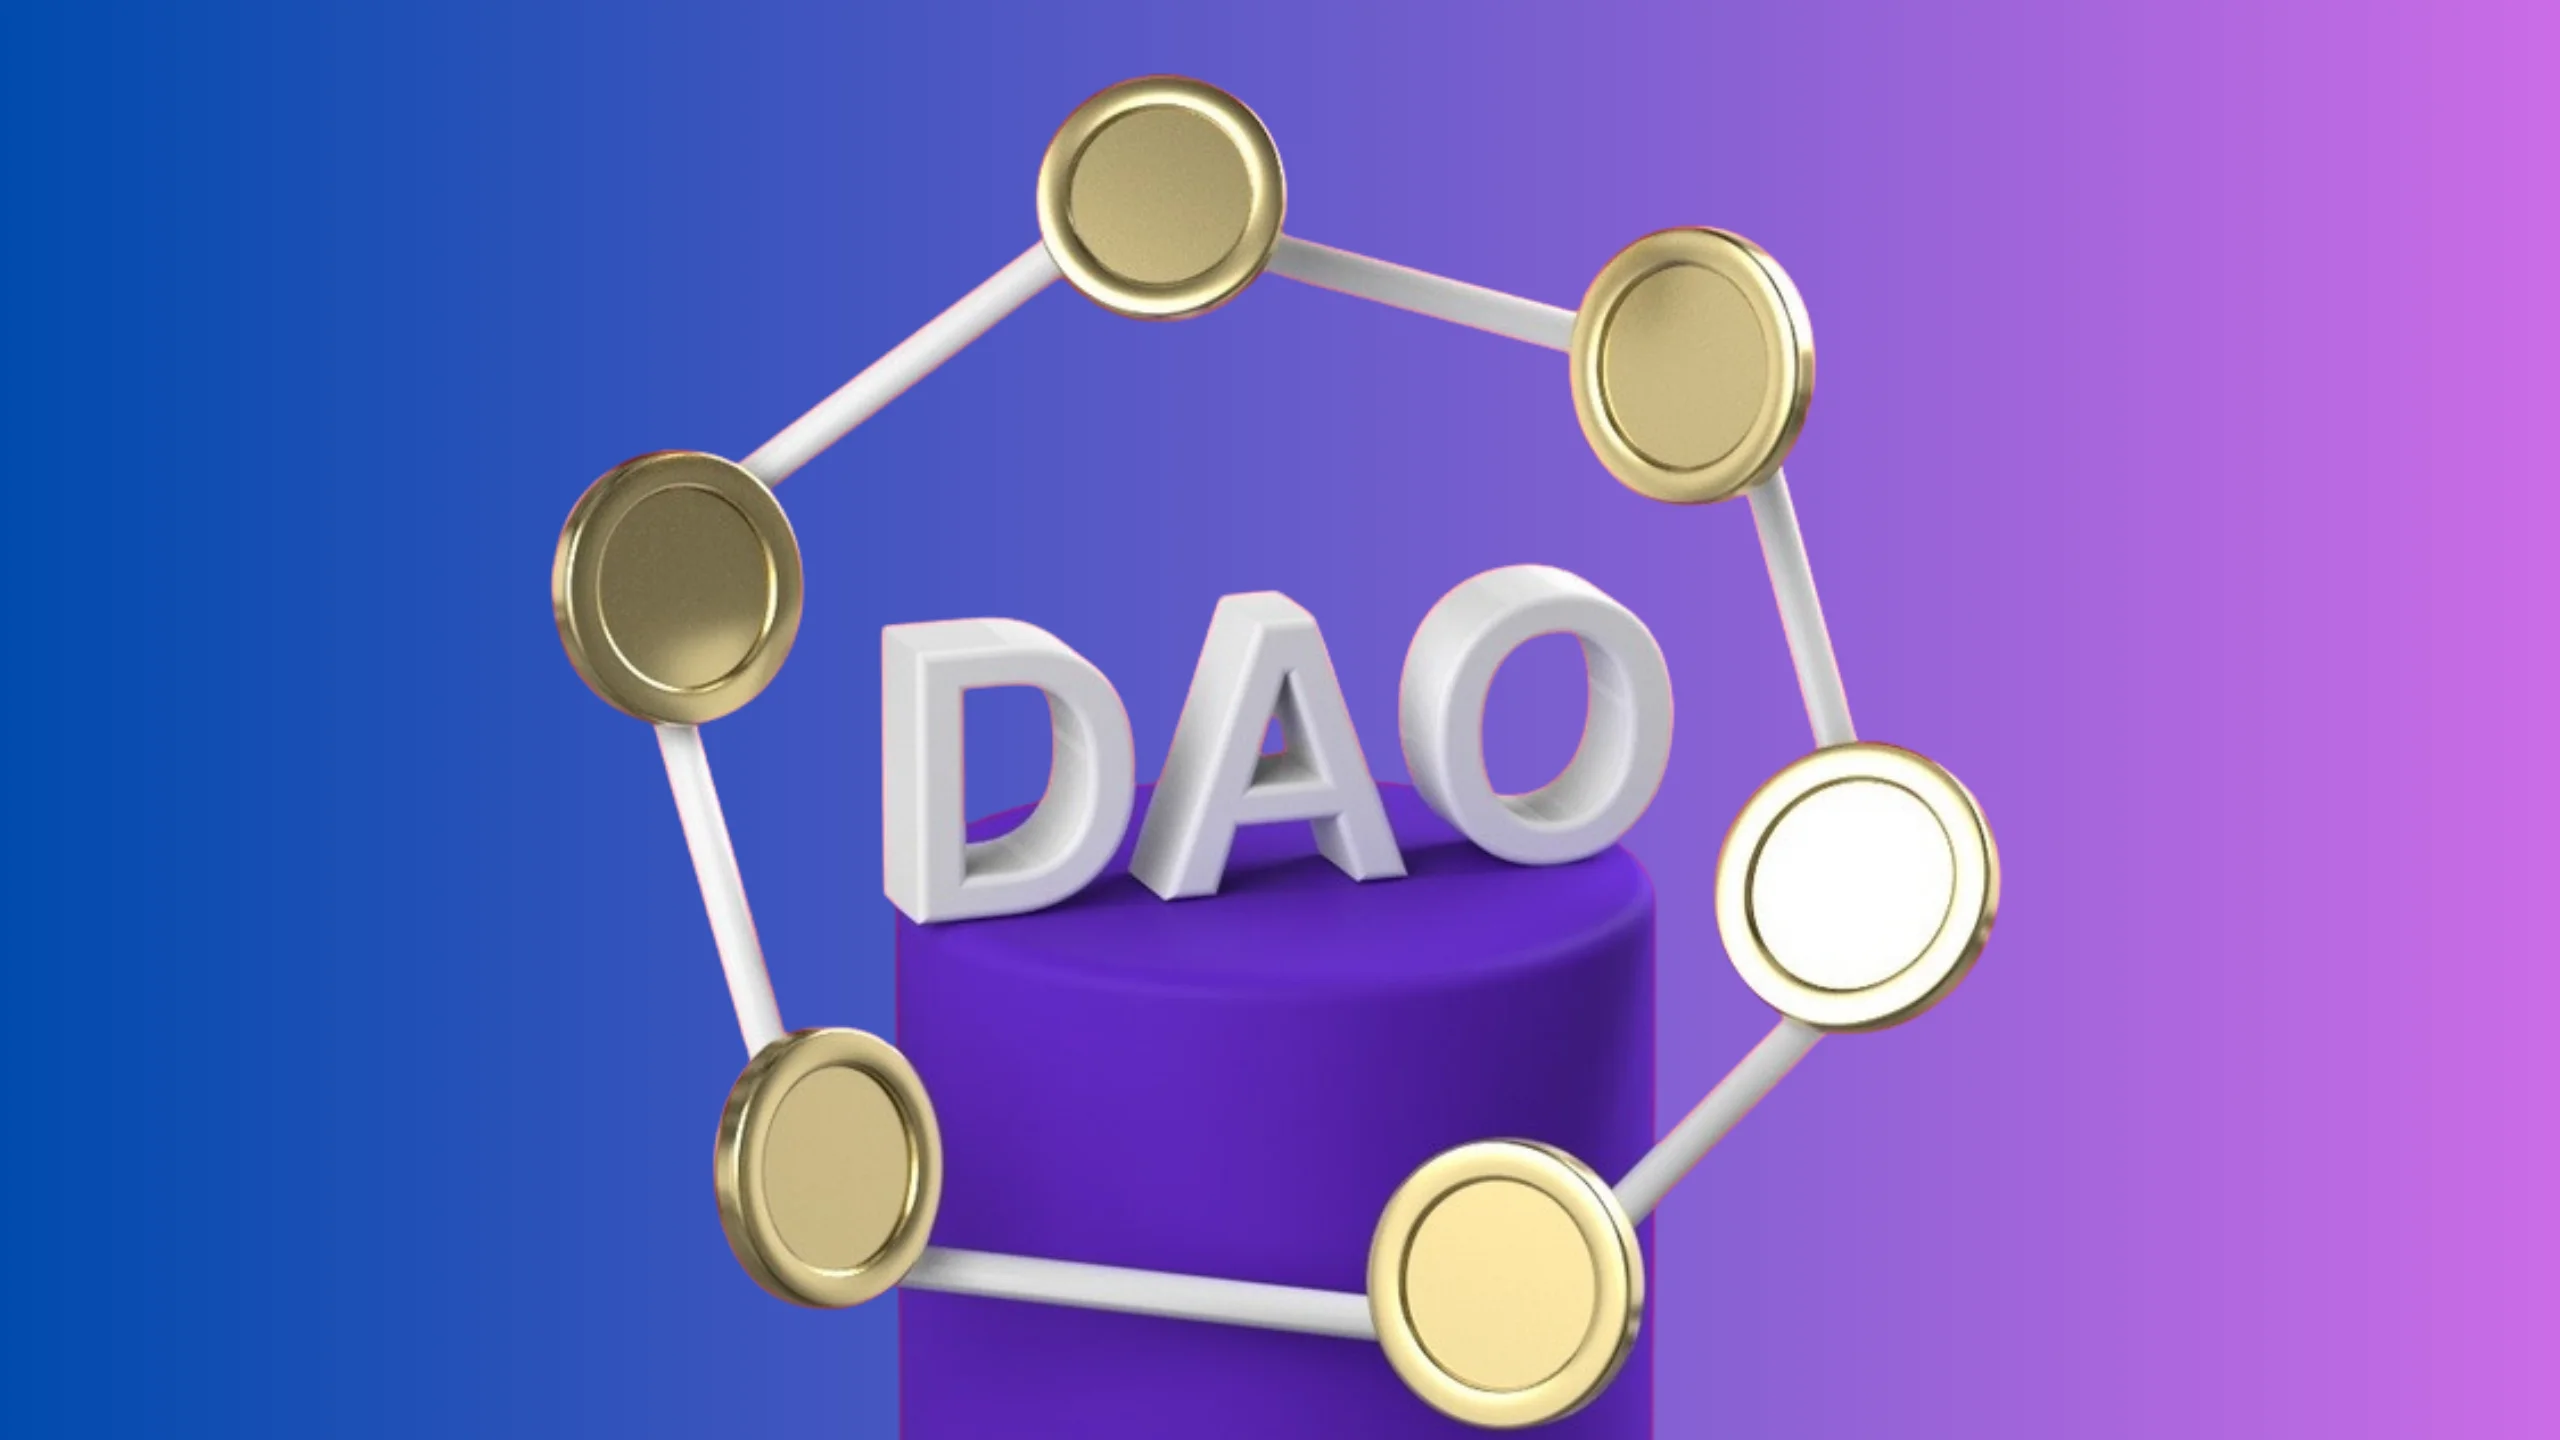 The DAO logo representing the decentralized autonomous organization that aimed to revolutionize venture capital funding through blockchain technology. The DAO's structure enabled decentralized decision-making and investment opportunities via smart contracts.